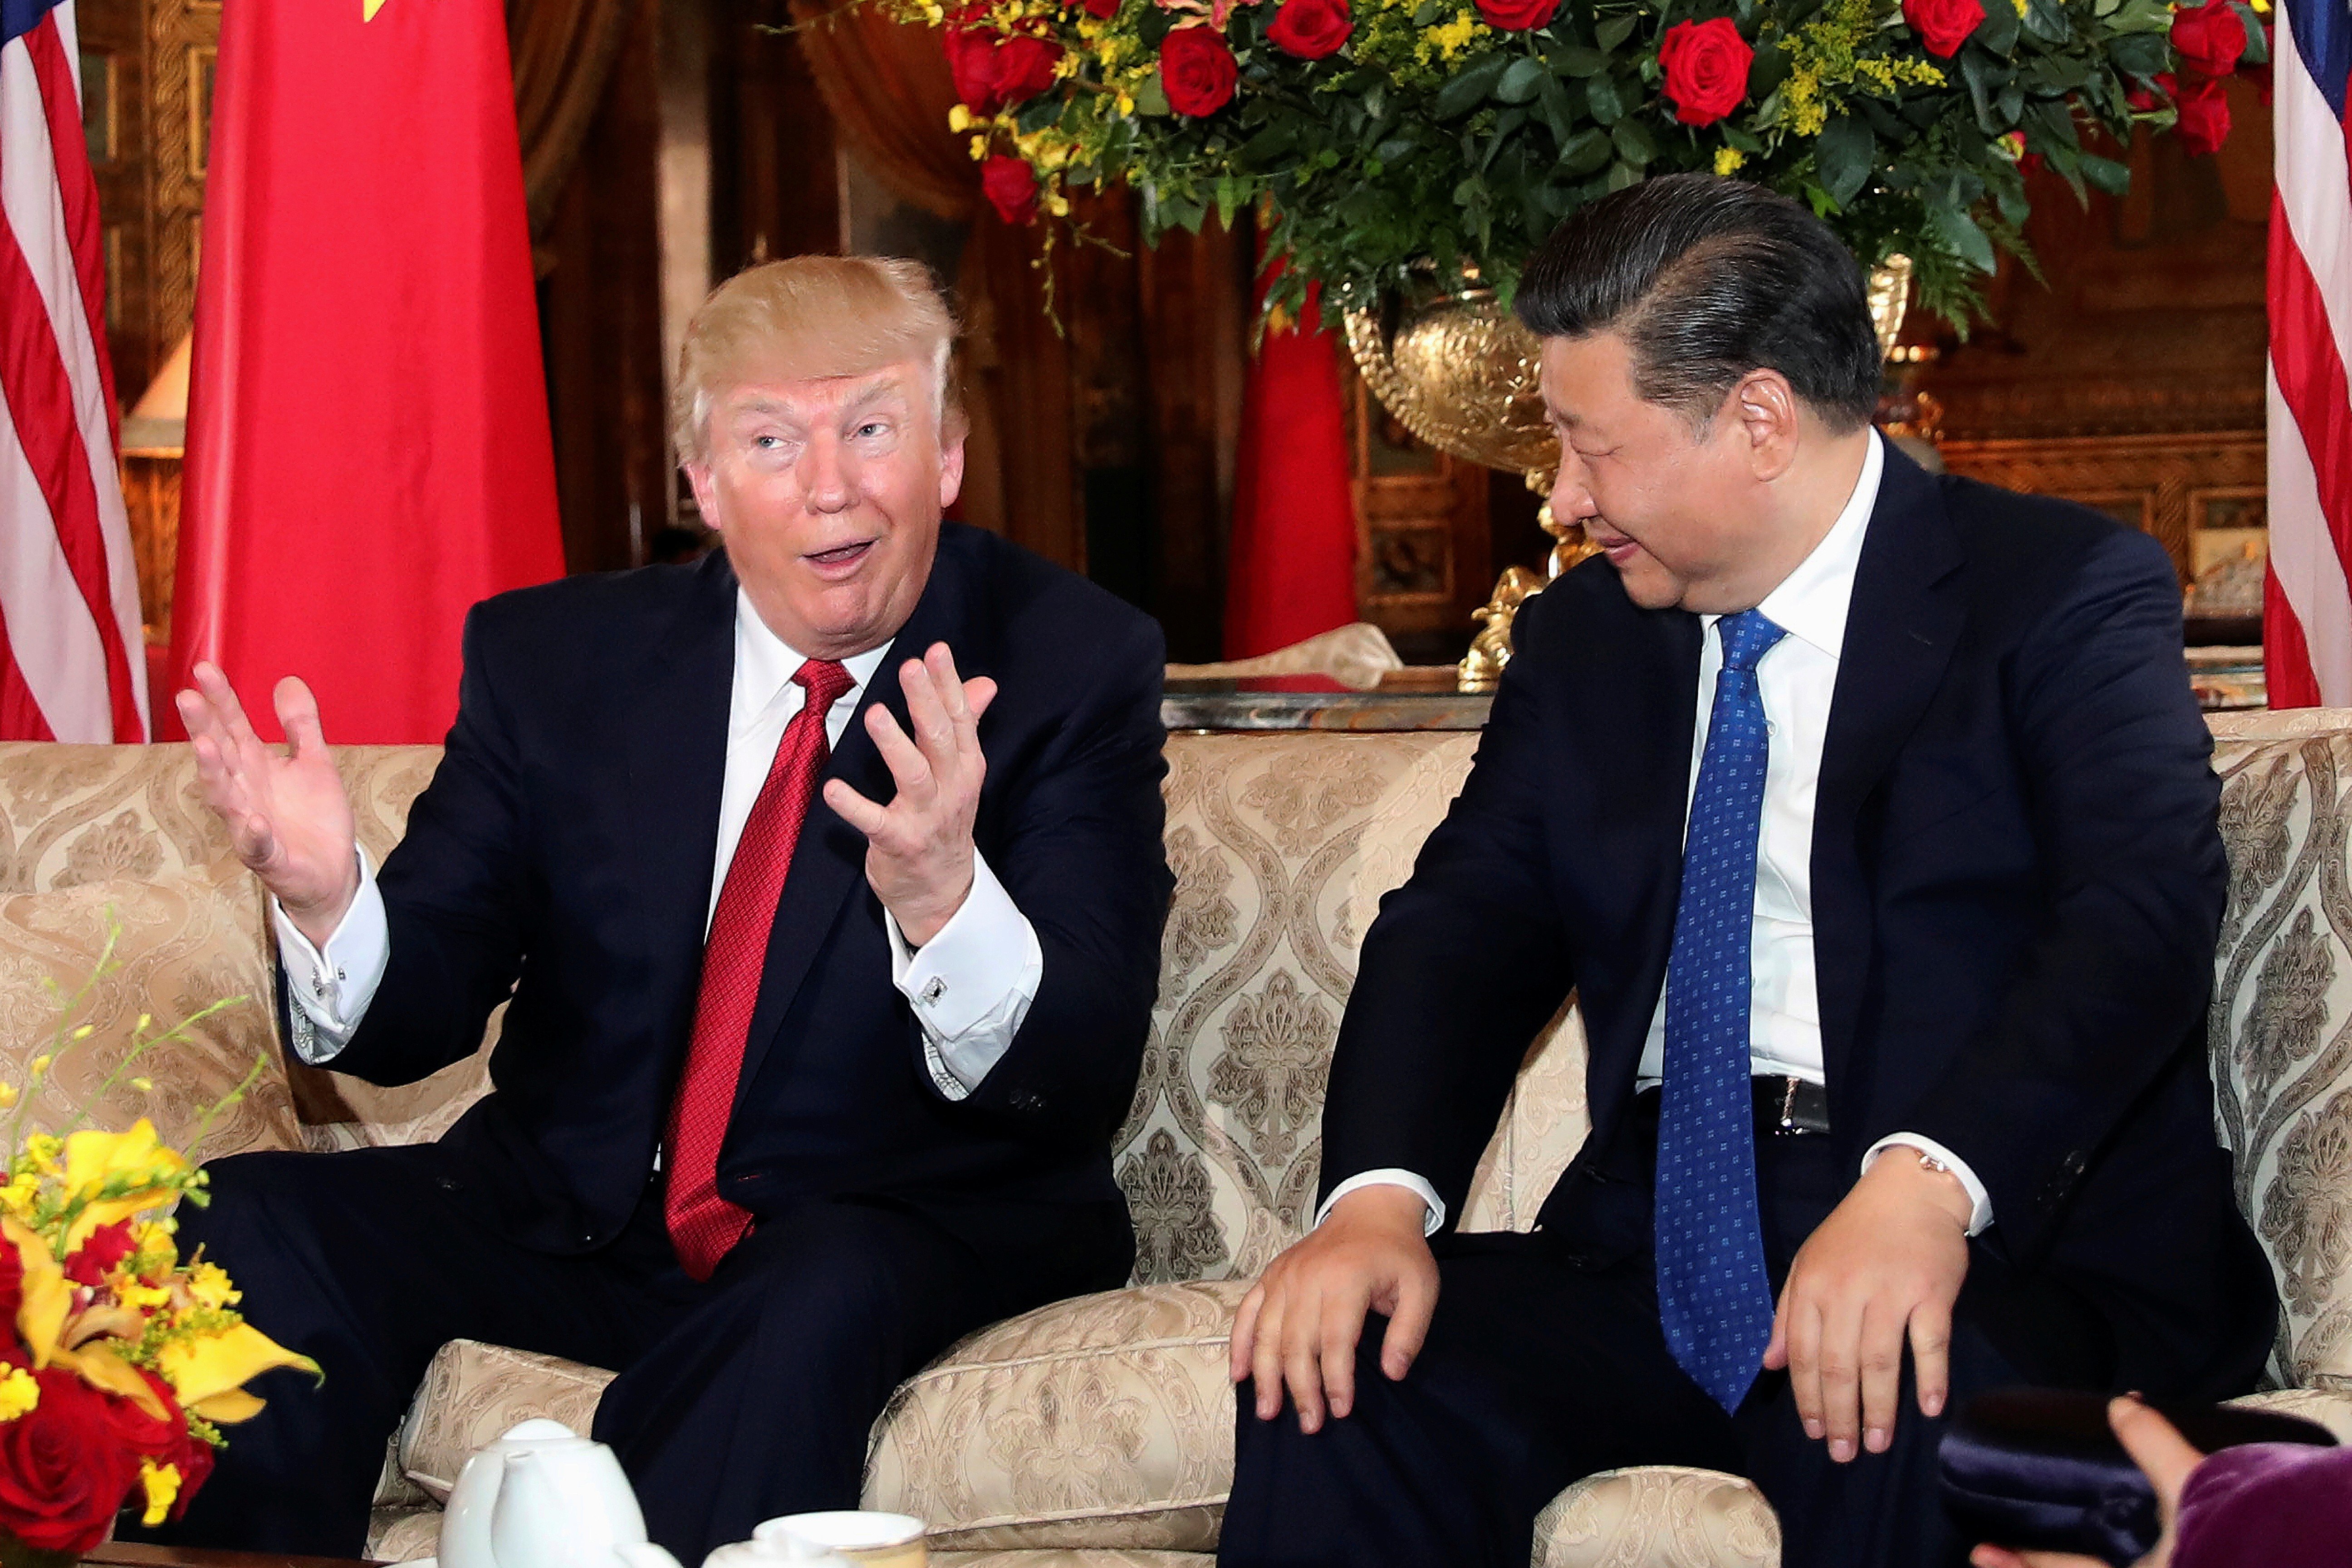 US President Donald Trump and President Xi Jinping of China at Mar-a-Lago estate in Palm Beach, Florida, in 2017. Under Xi, China has narrowed its power gap with the United States. Photo: Reuters